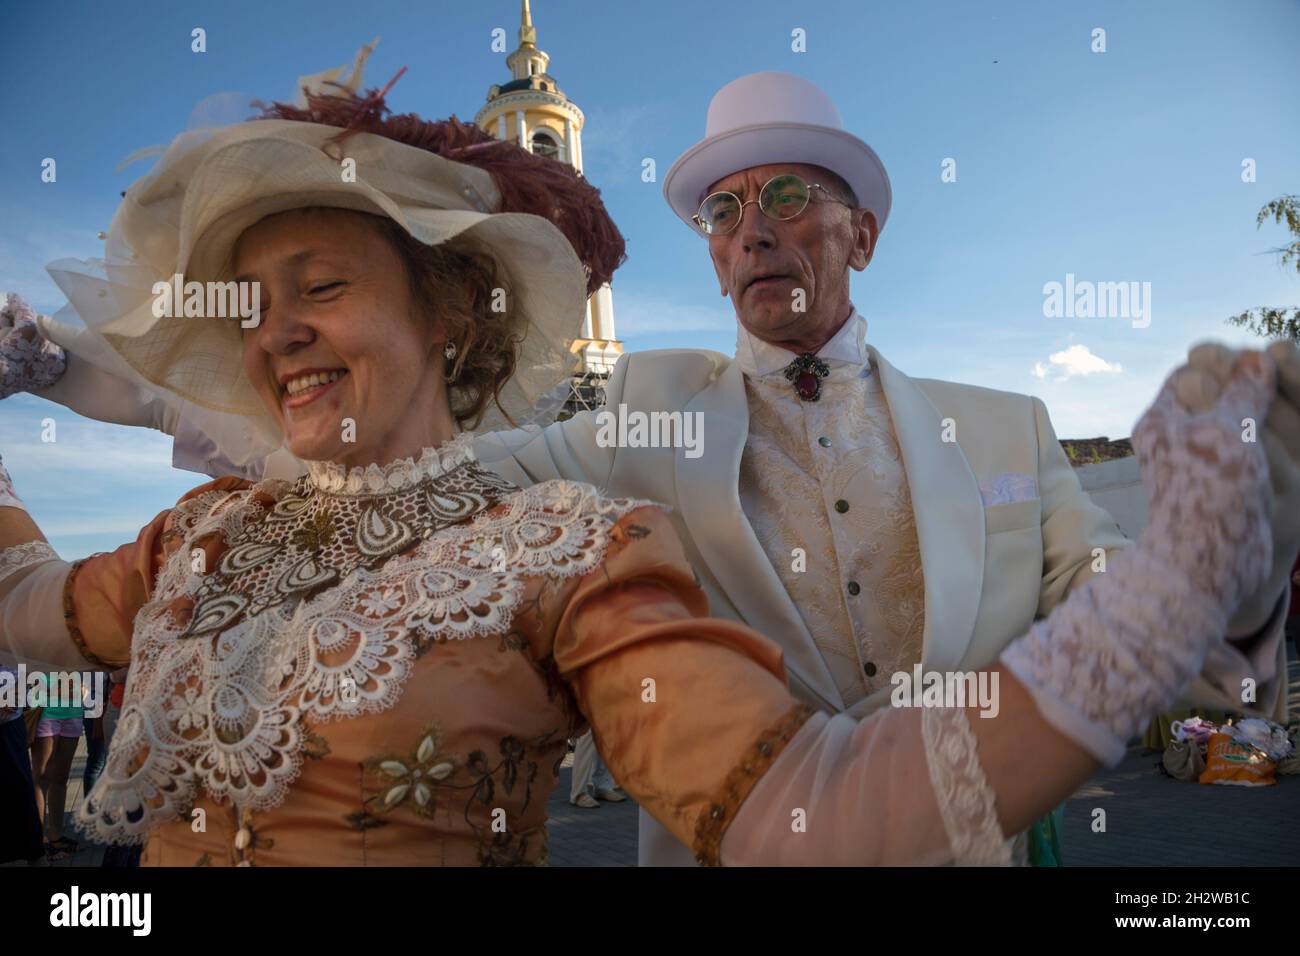 Suzdal, Russia. 8th of August, 2015. People in 19th century clothes dancing at the main street of Suzdal medieval town during the celebration of the City Day, Vladimir oblast, Russia Stock Photo